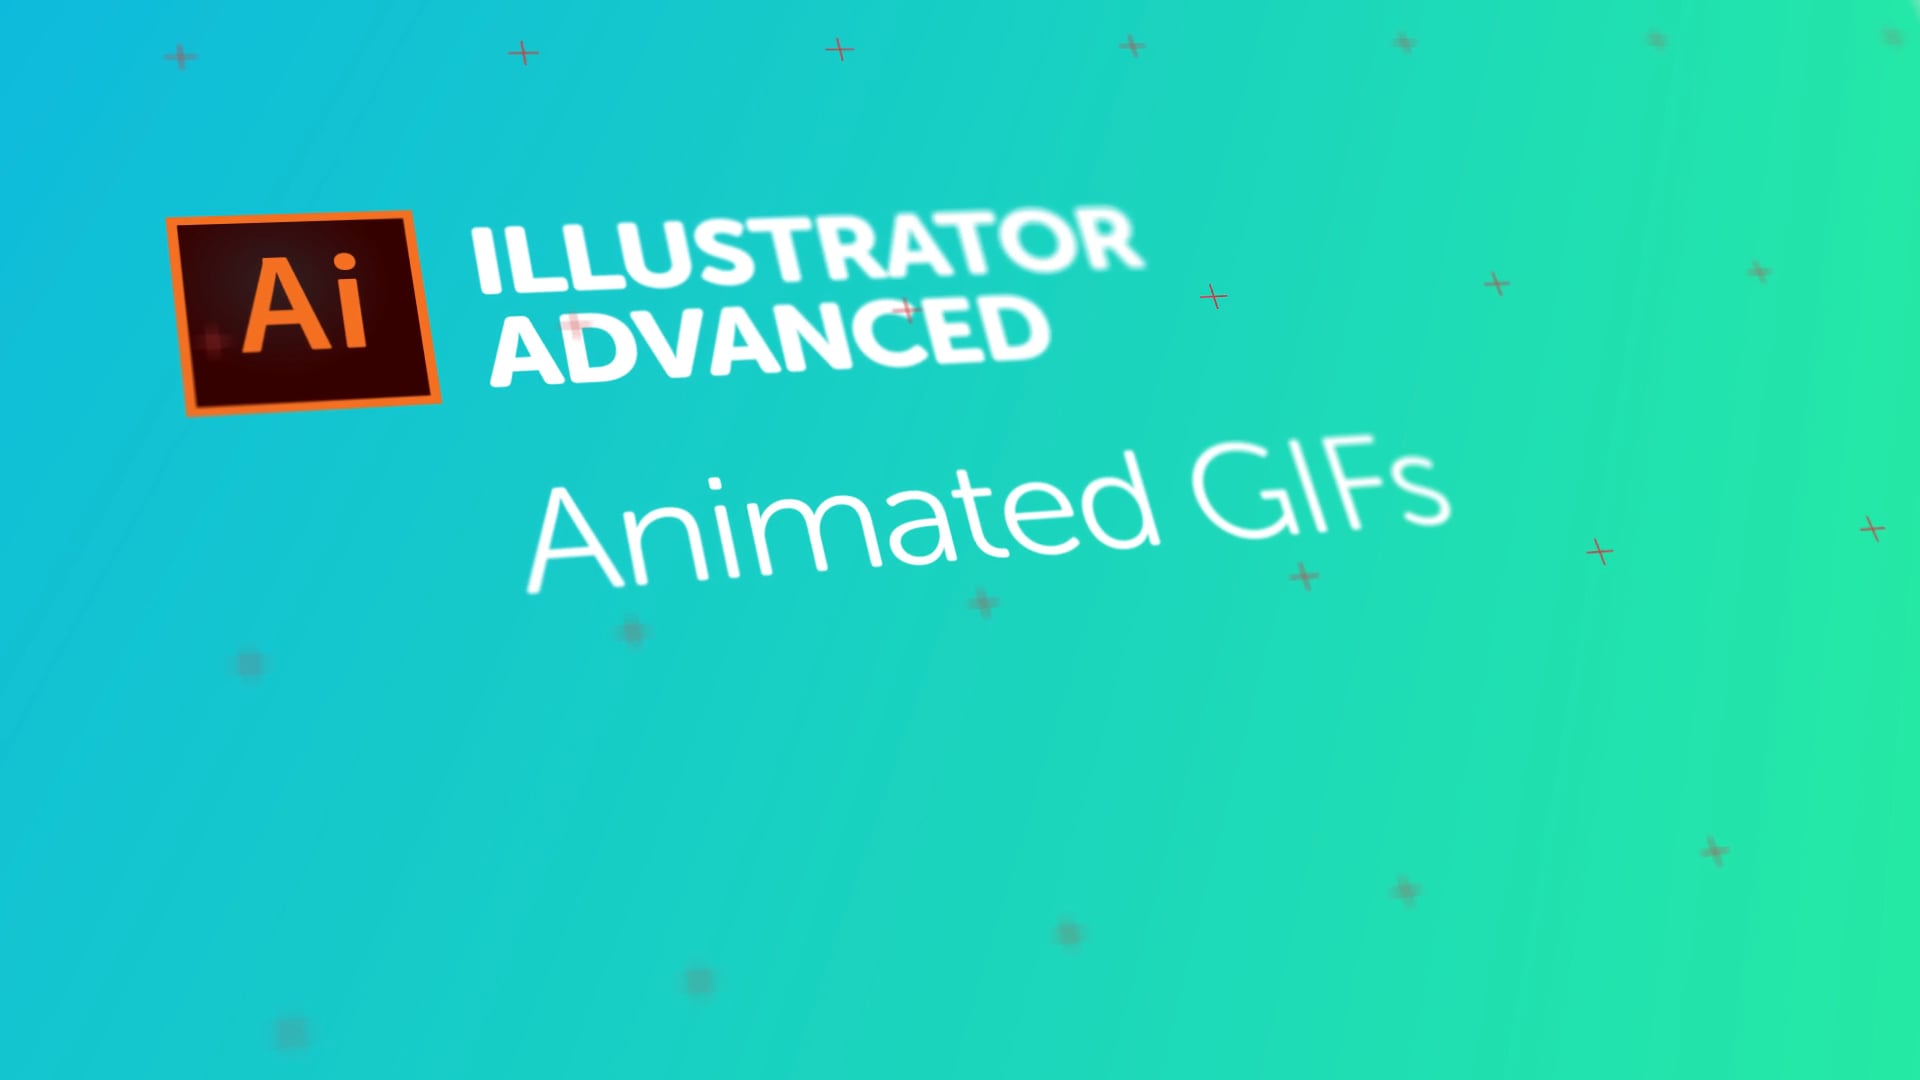 How to make an animated GIF using Adobe Illustrator CC | Bring Your Own  Laptop